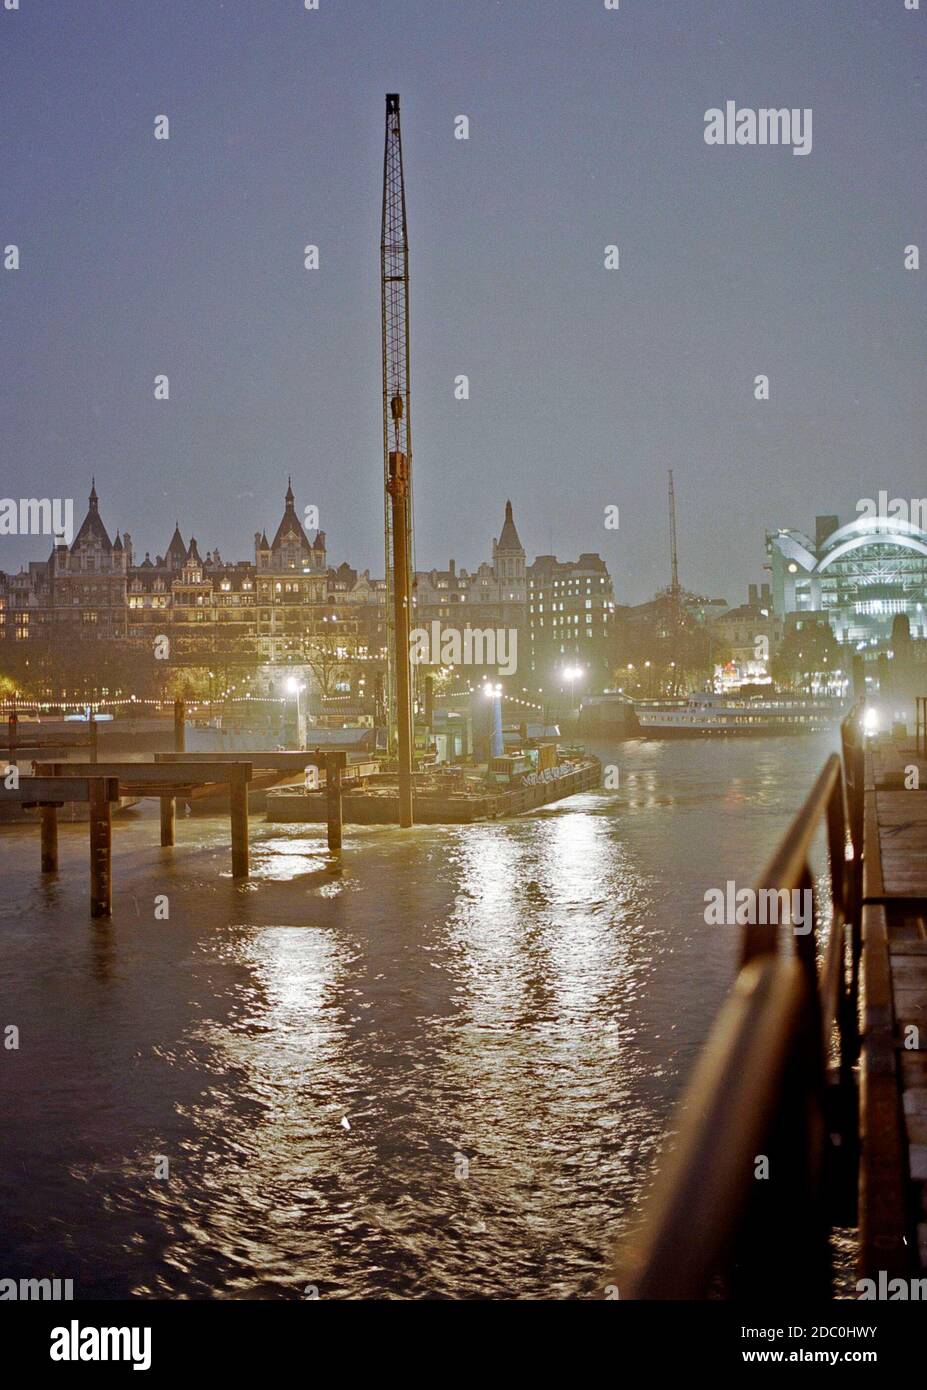 1996, construction works on the river Thames at Hungerford Bridge, London, South East England, UK Stock Photo